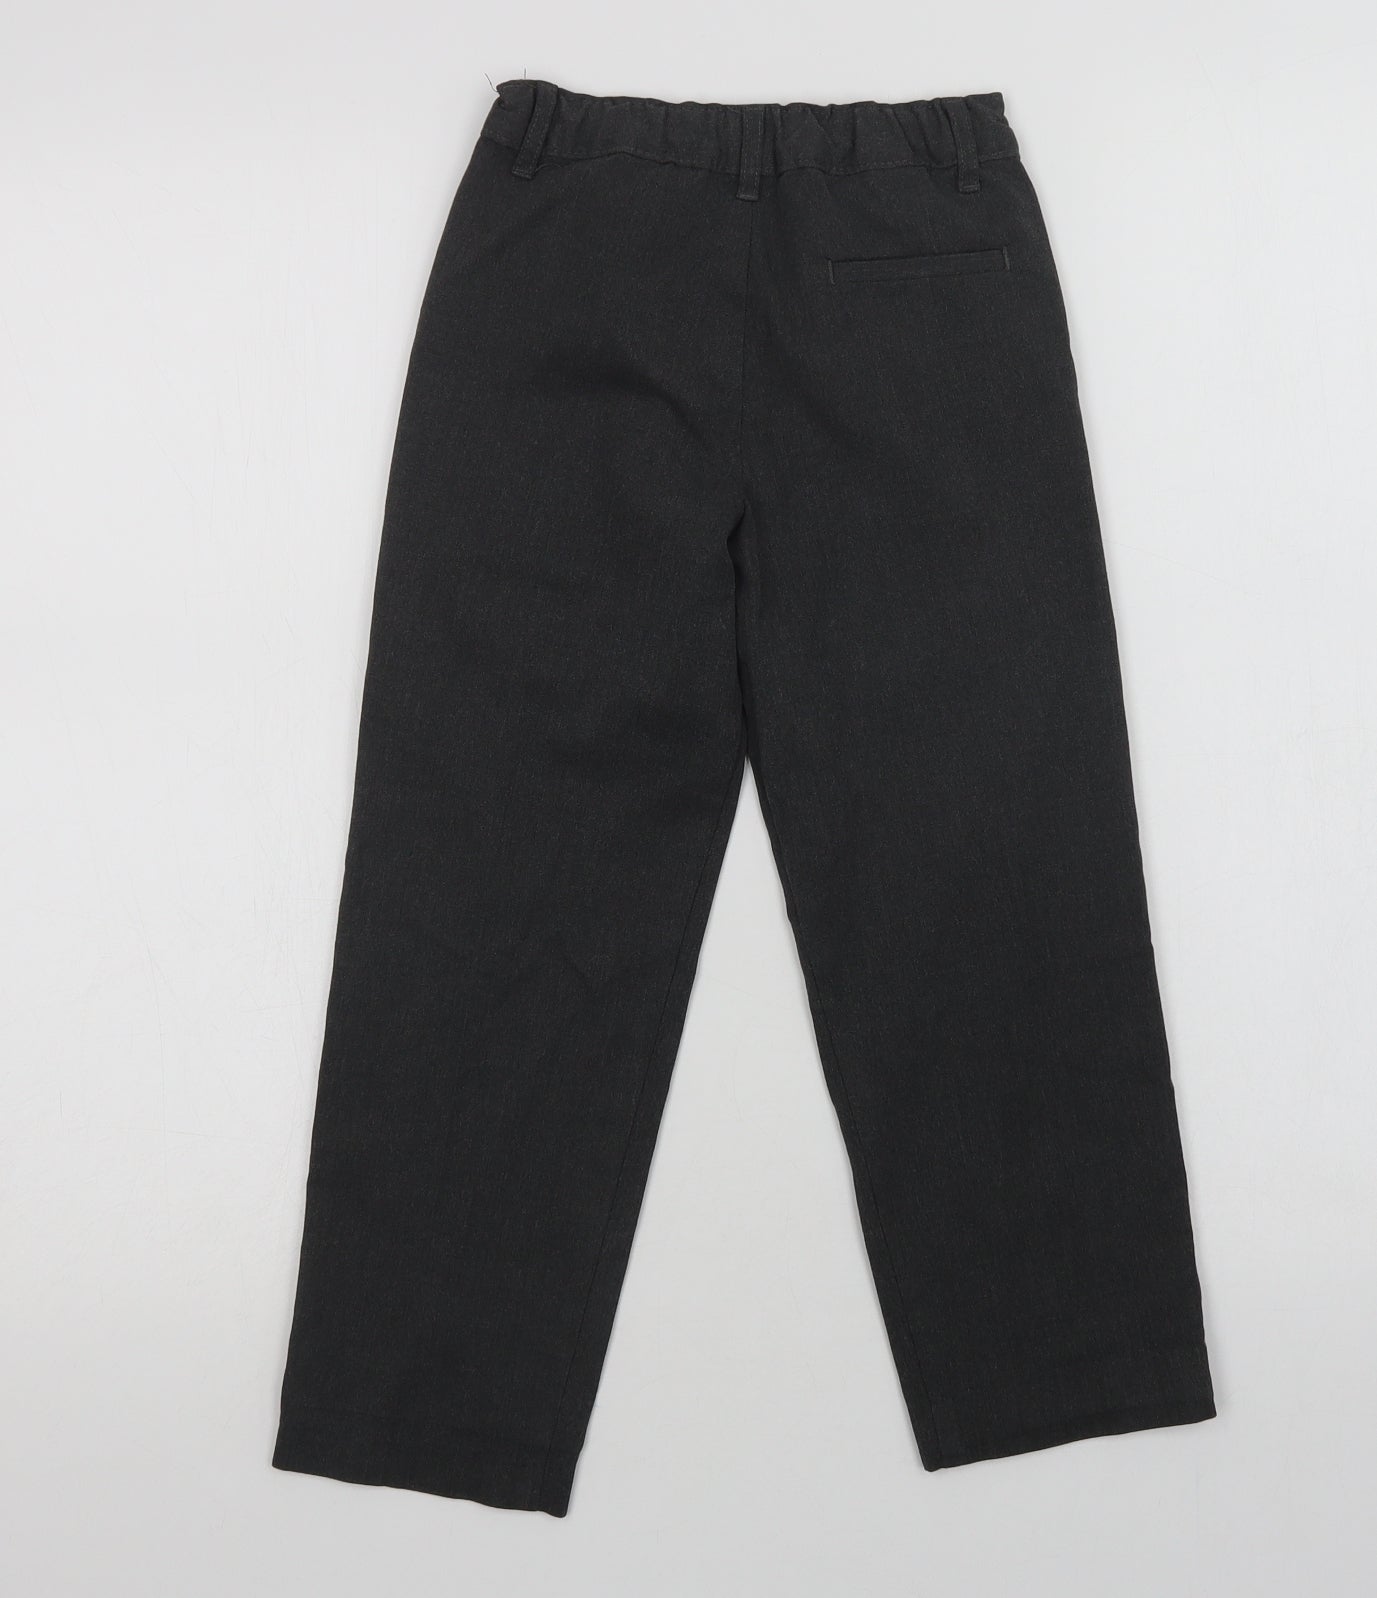 Dunnes Stores Boys Grey  Polyester Dress Pants Trousers Size 4-5 Years  Regular  - School Wear